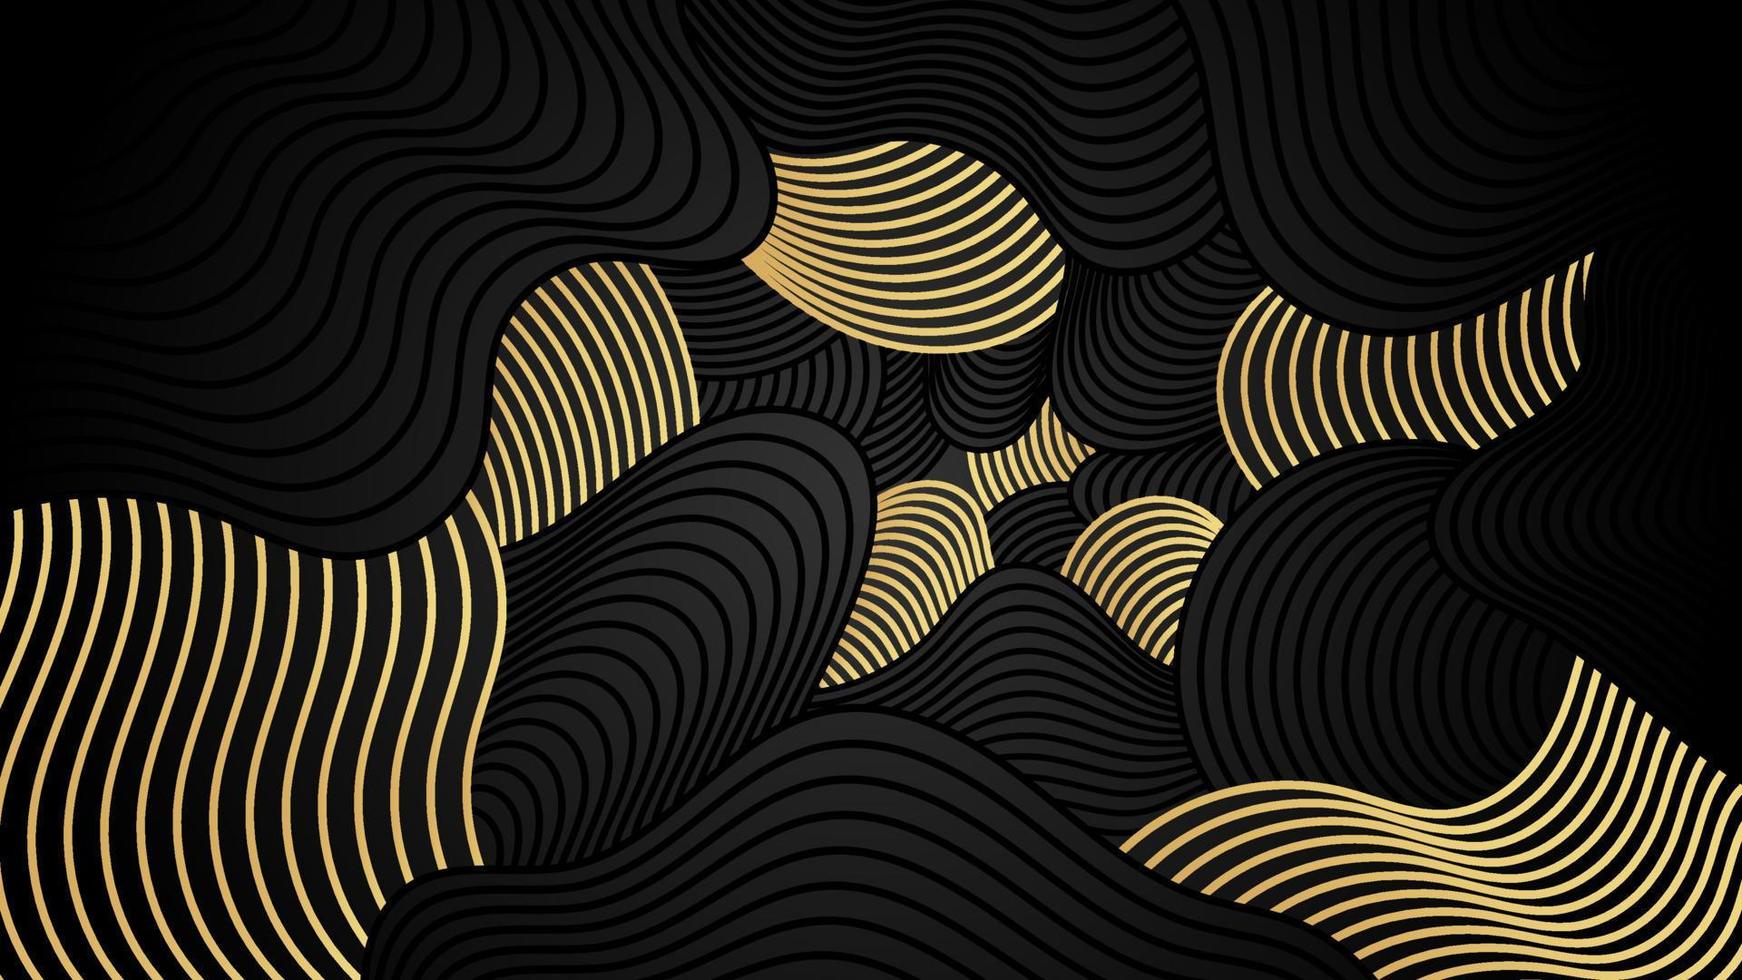 3D modern wave curve abstract presentation background. Lines layer background. Abstract decoration, pattern, luxury golden gray gradients, 3d vector illustration. Black dark background